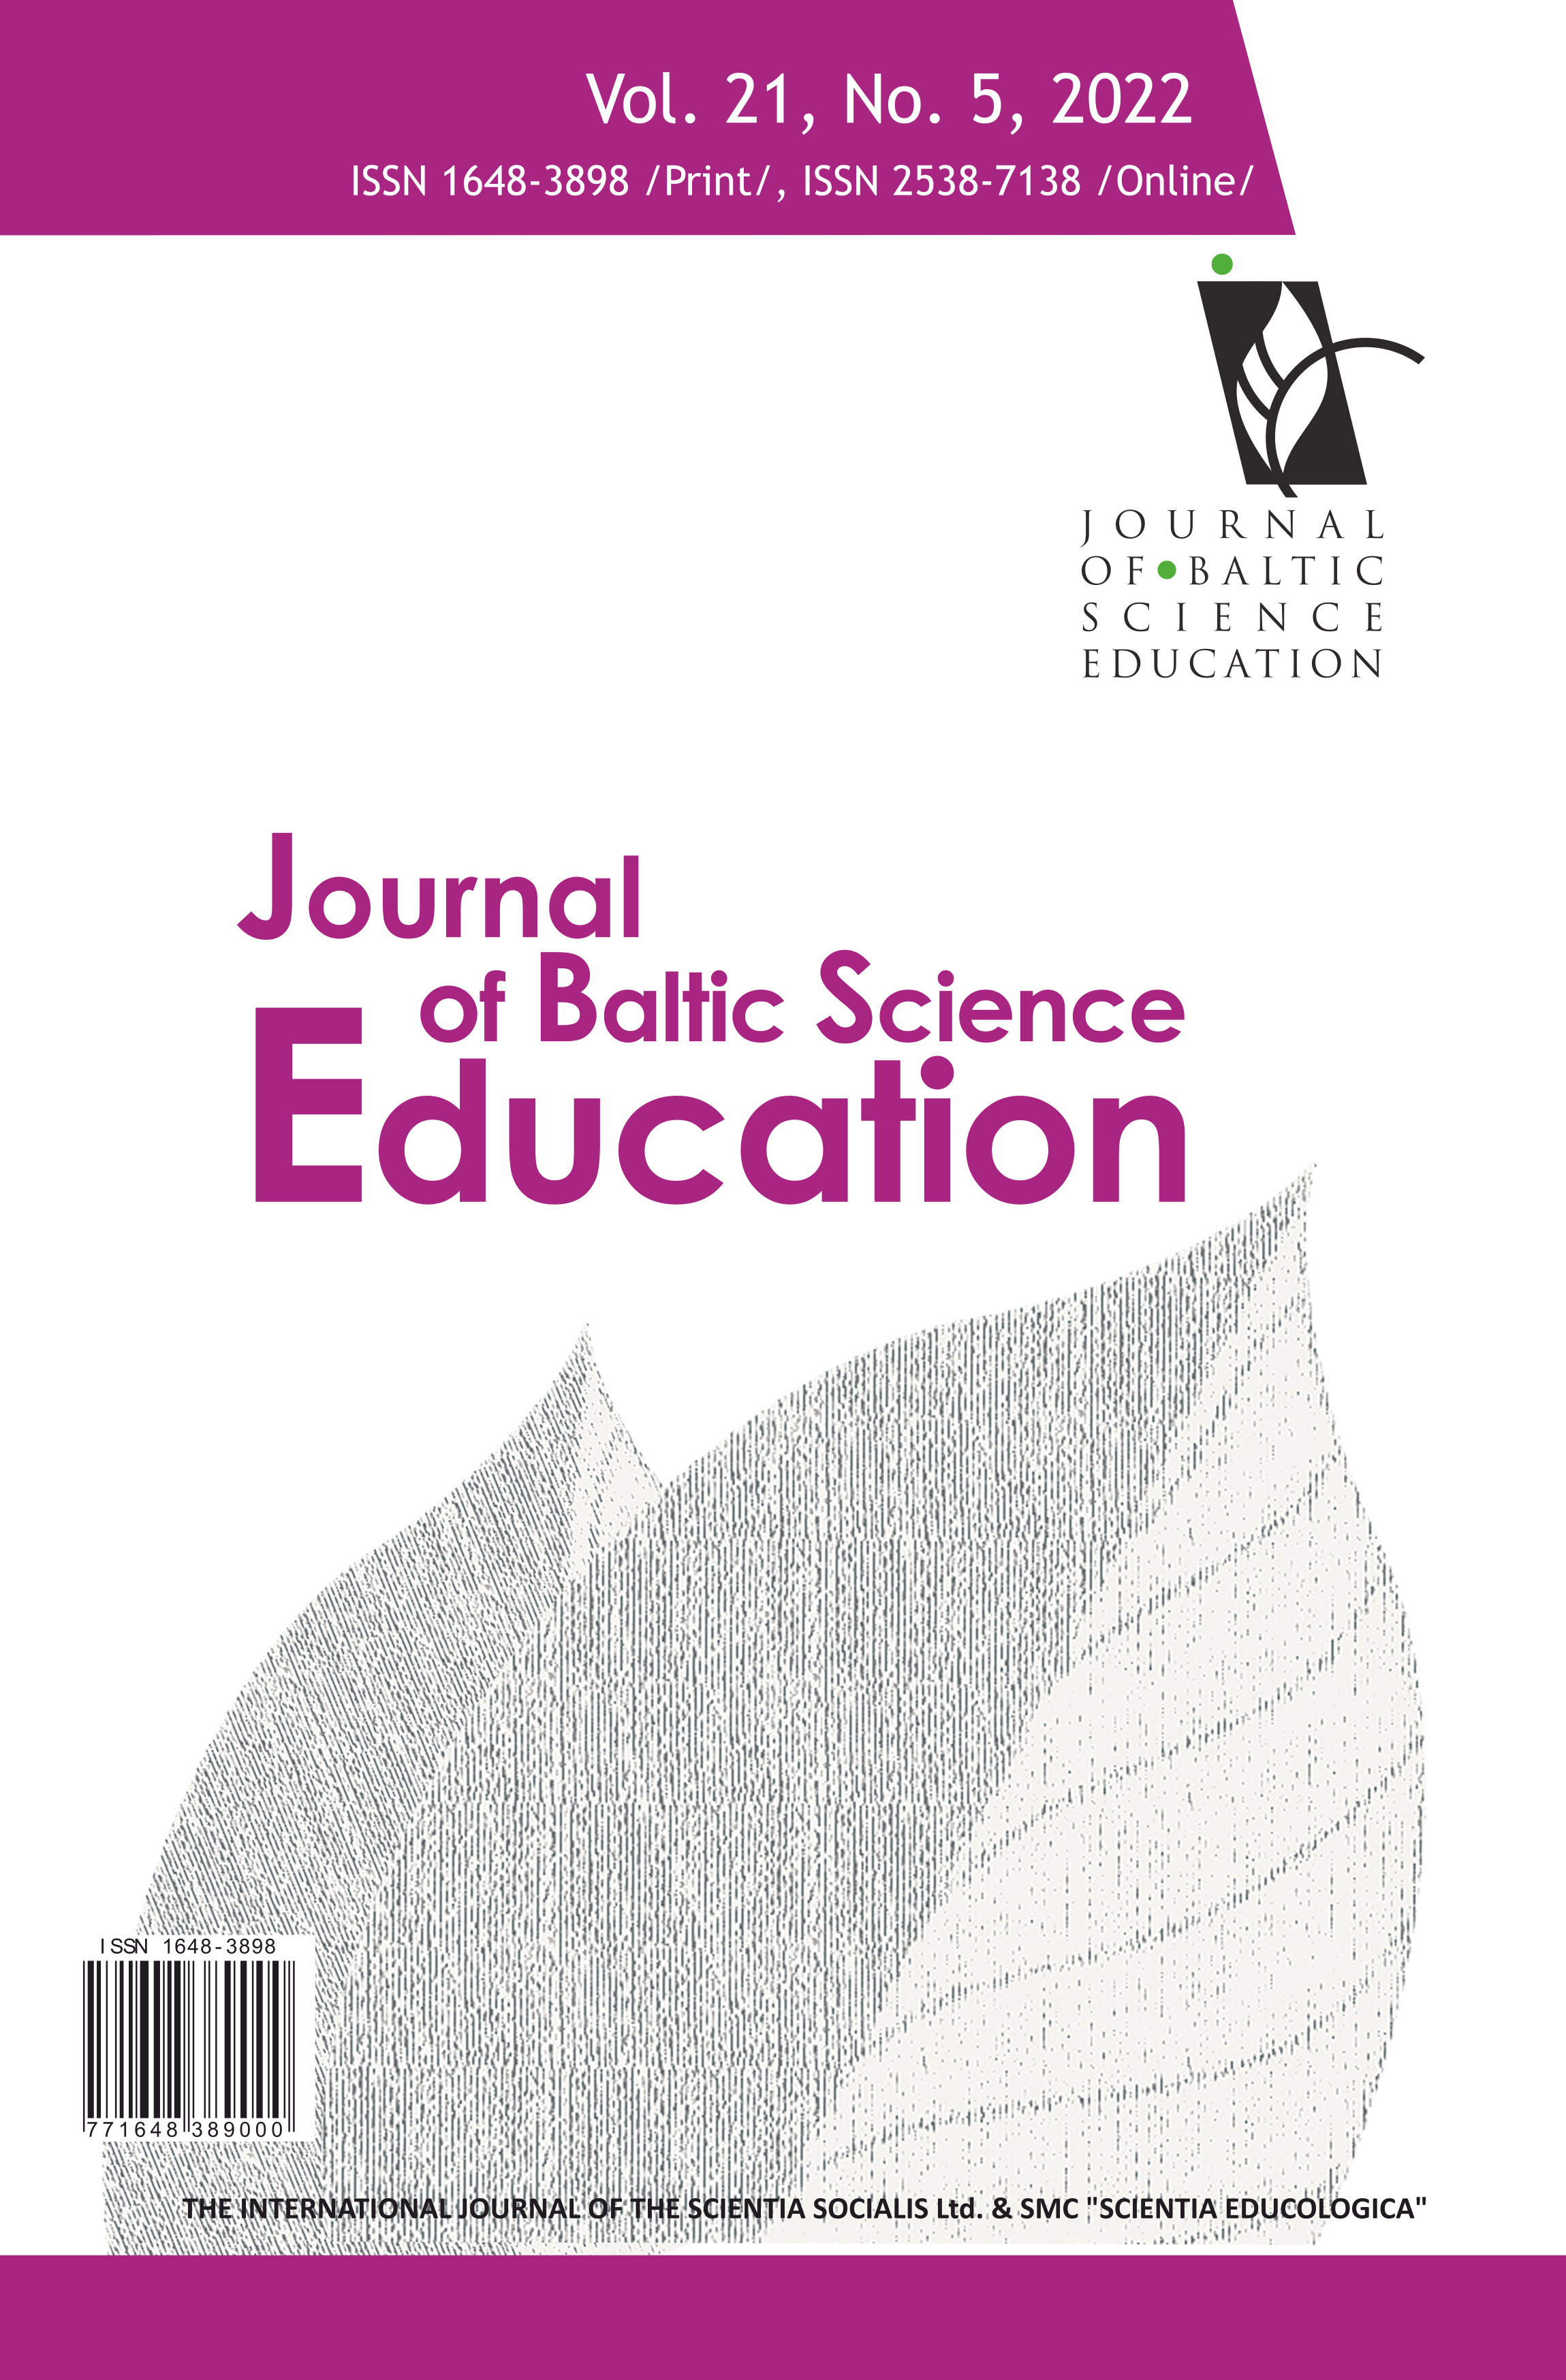 RESEARCH TRENDS AND ISSUES INCLUDING COMPUTATIONAL THINKING IN SCIENCE EDUCATION AND MATHEMATICS EDUCATION IN THE REPUBLIC OF KOREA